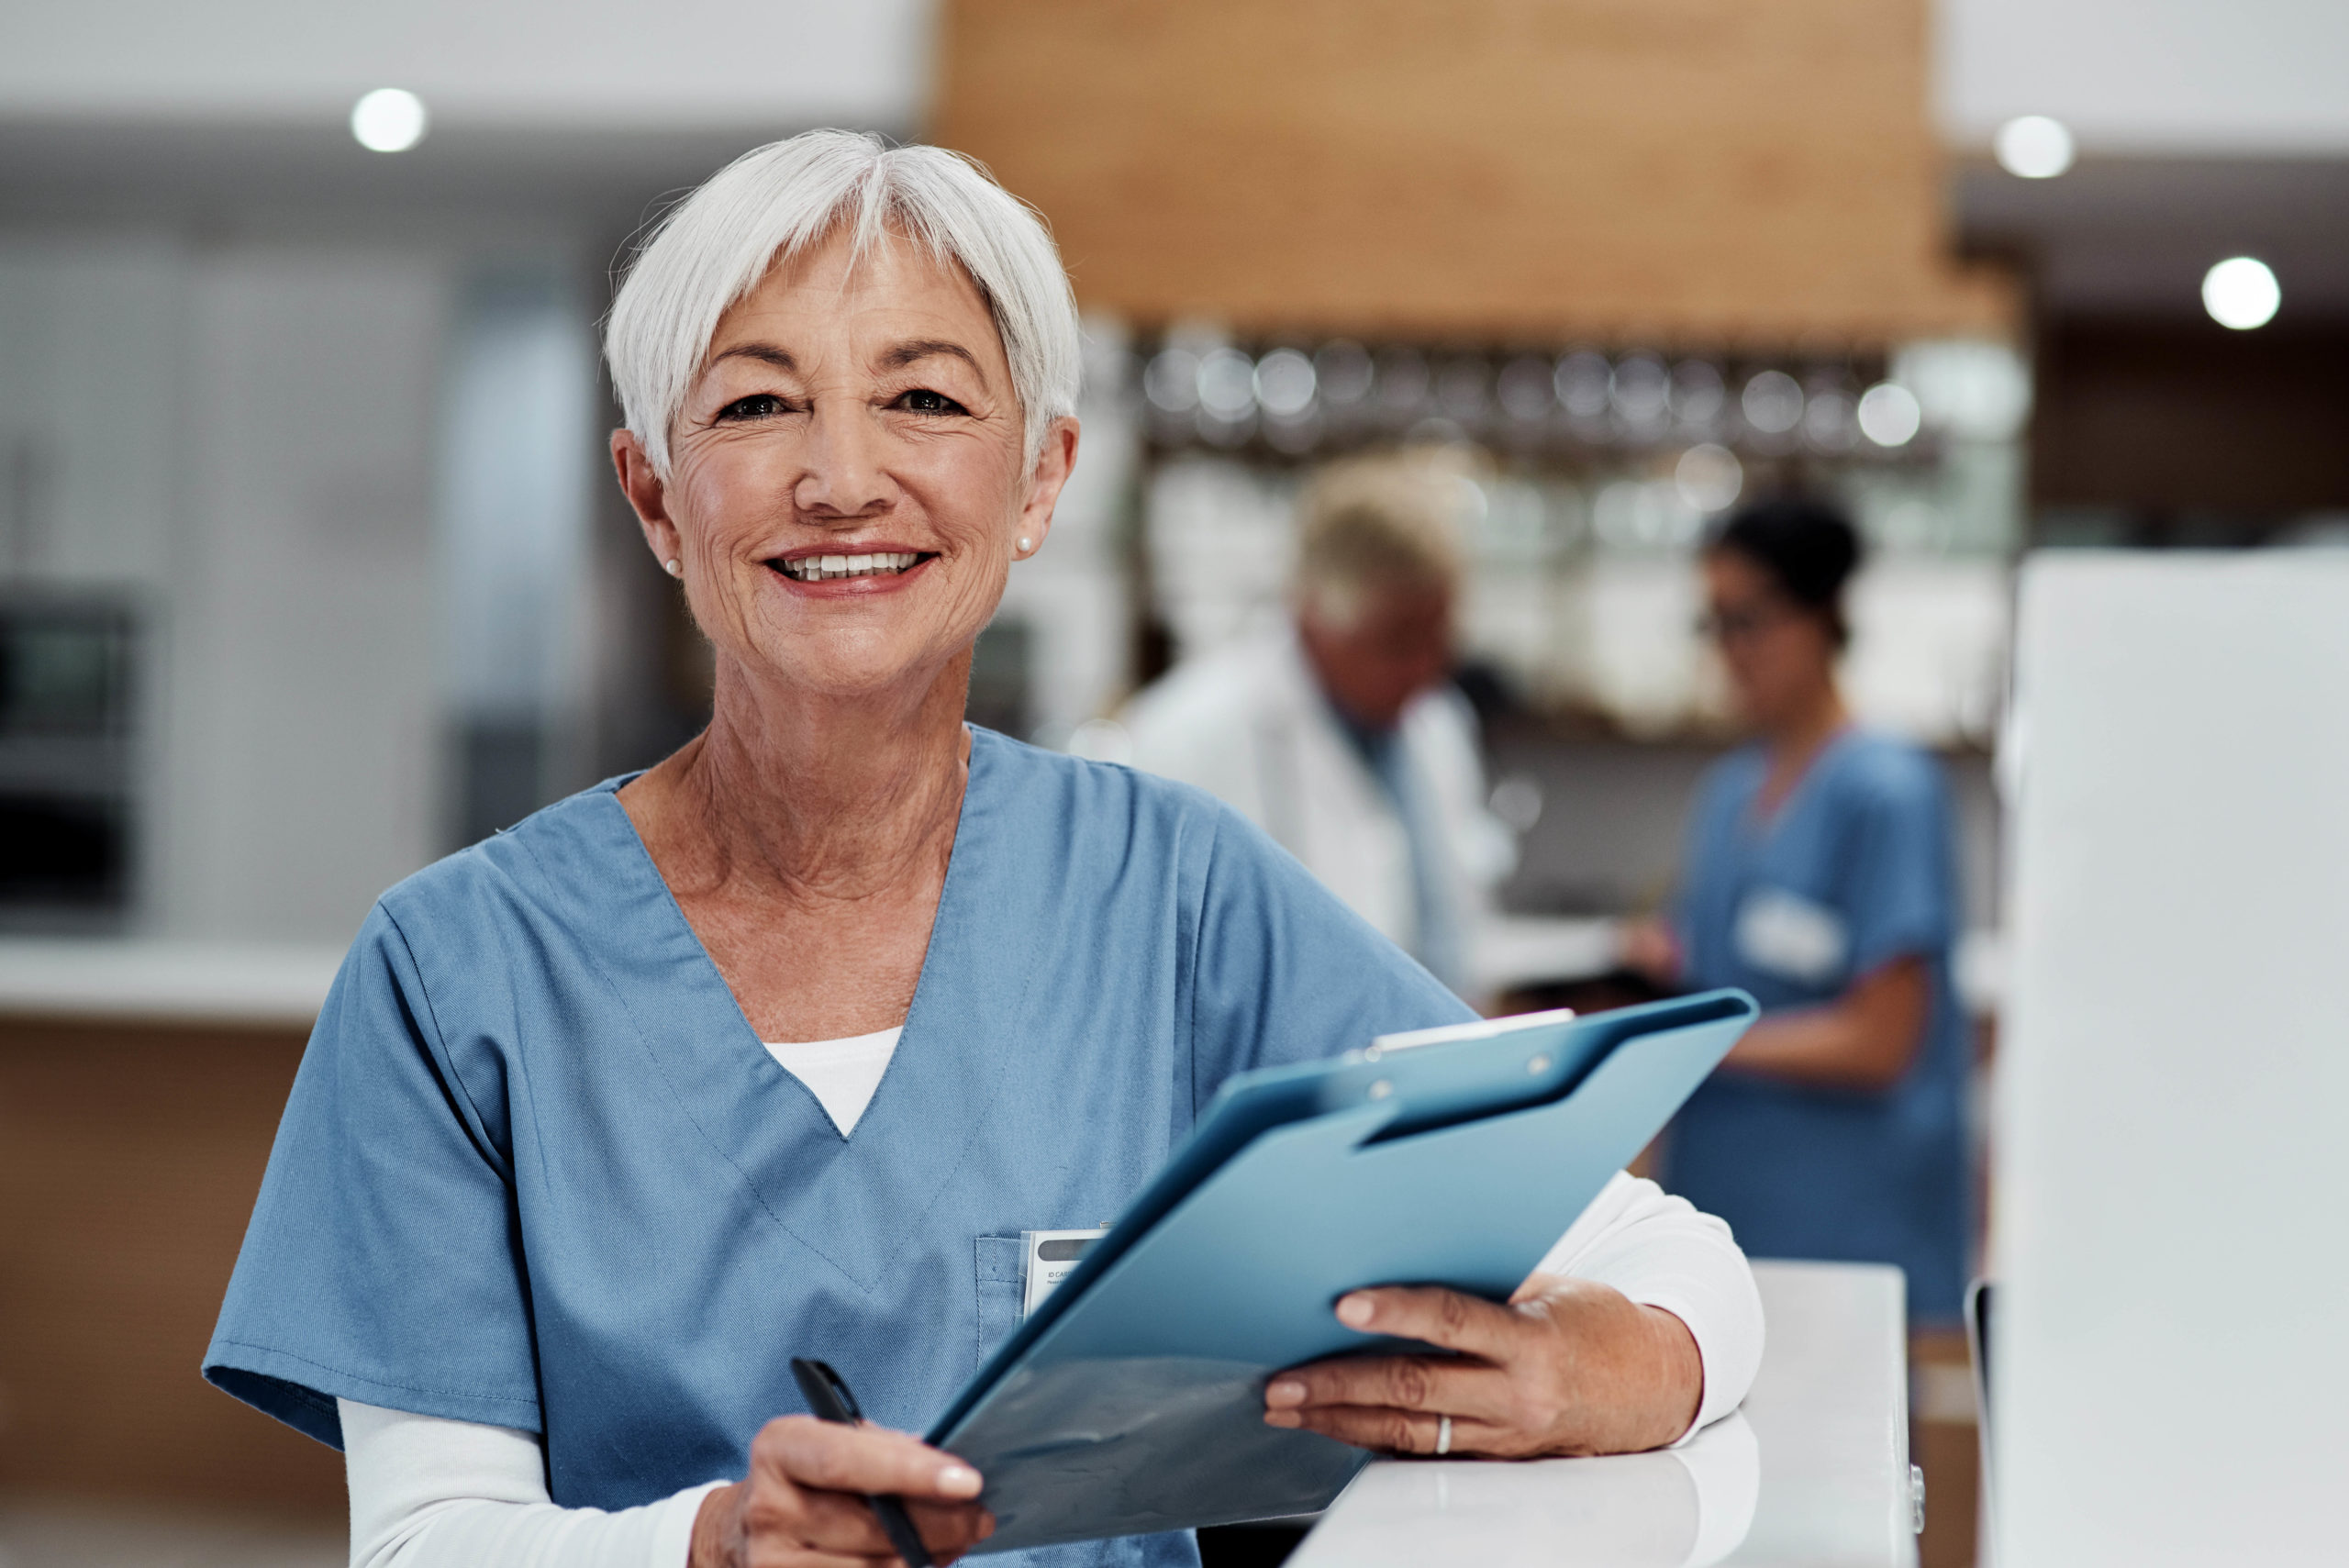 Life after retirement: are nurses prepared?